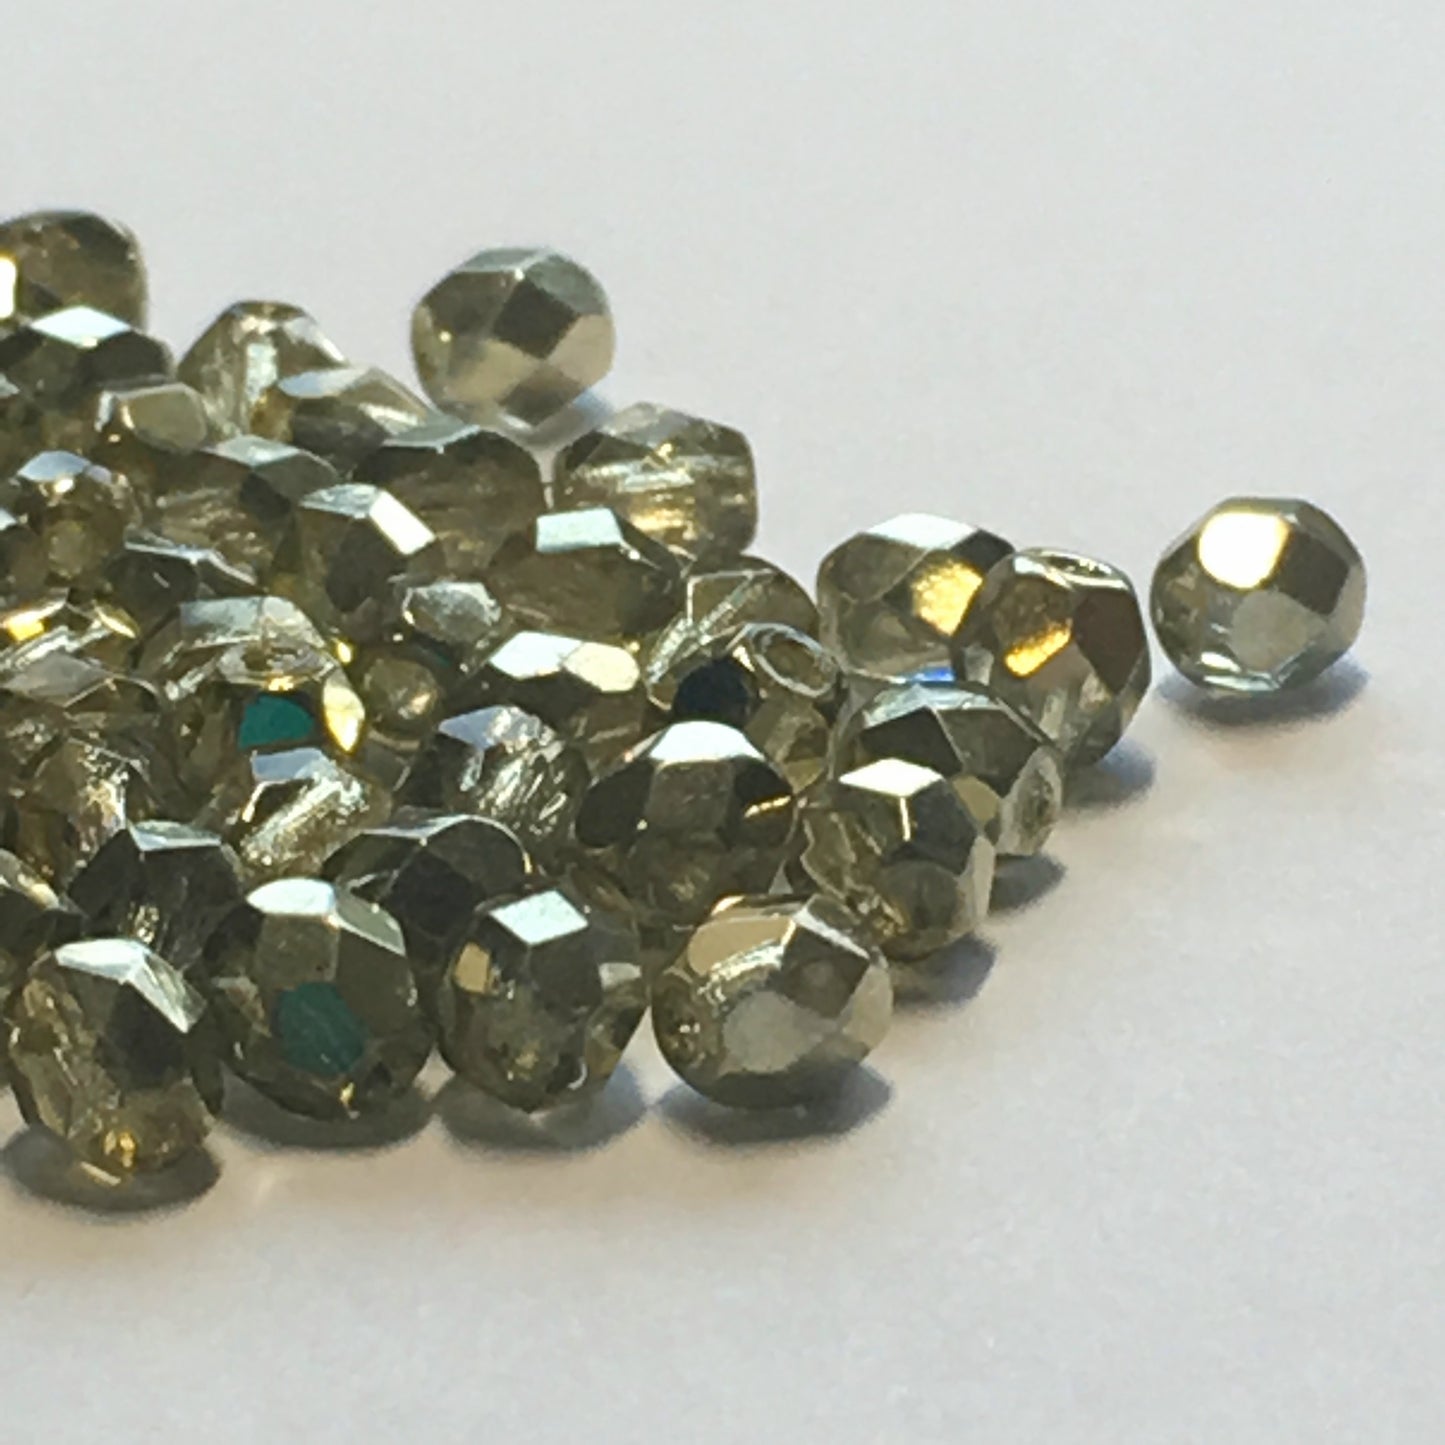 Czech Fire Polished FPR0497353 Seafoam Faceted Round Glass Beads, 4 mm, 23 or 25 Beads